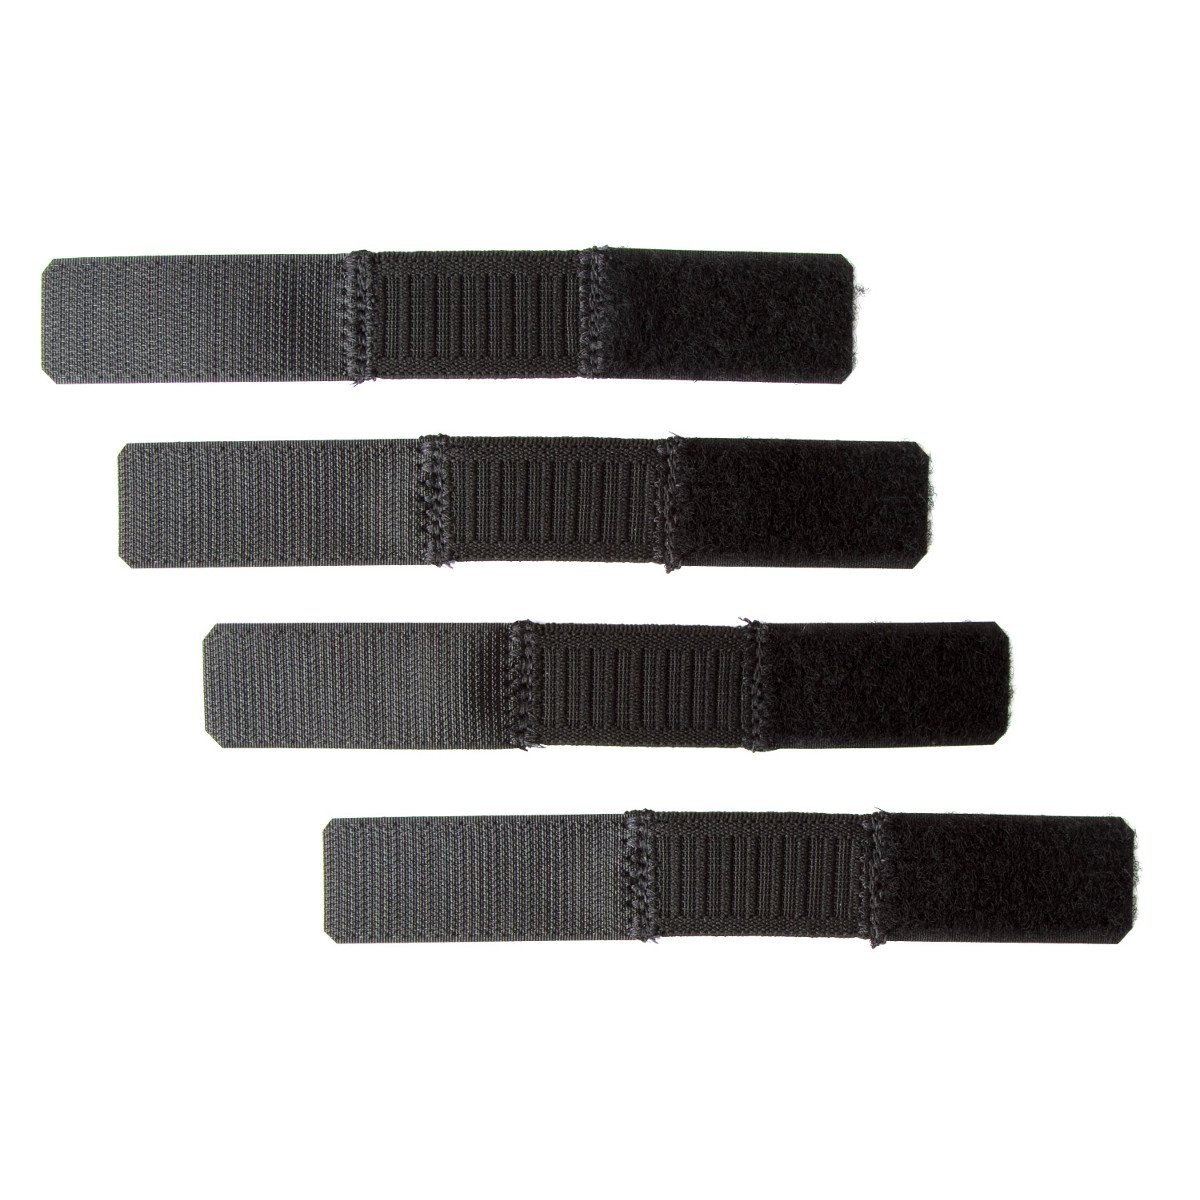 Asterisk Patella Cup Side Straps UltraCell/Cell/CytoCell for Knee Brace